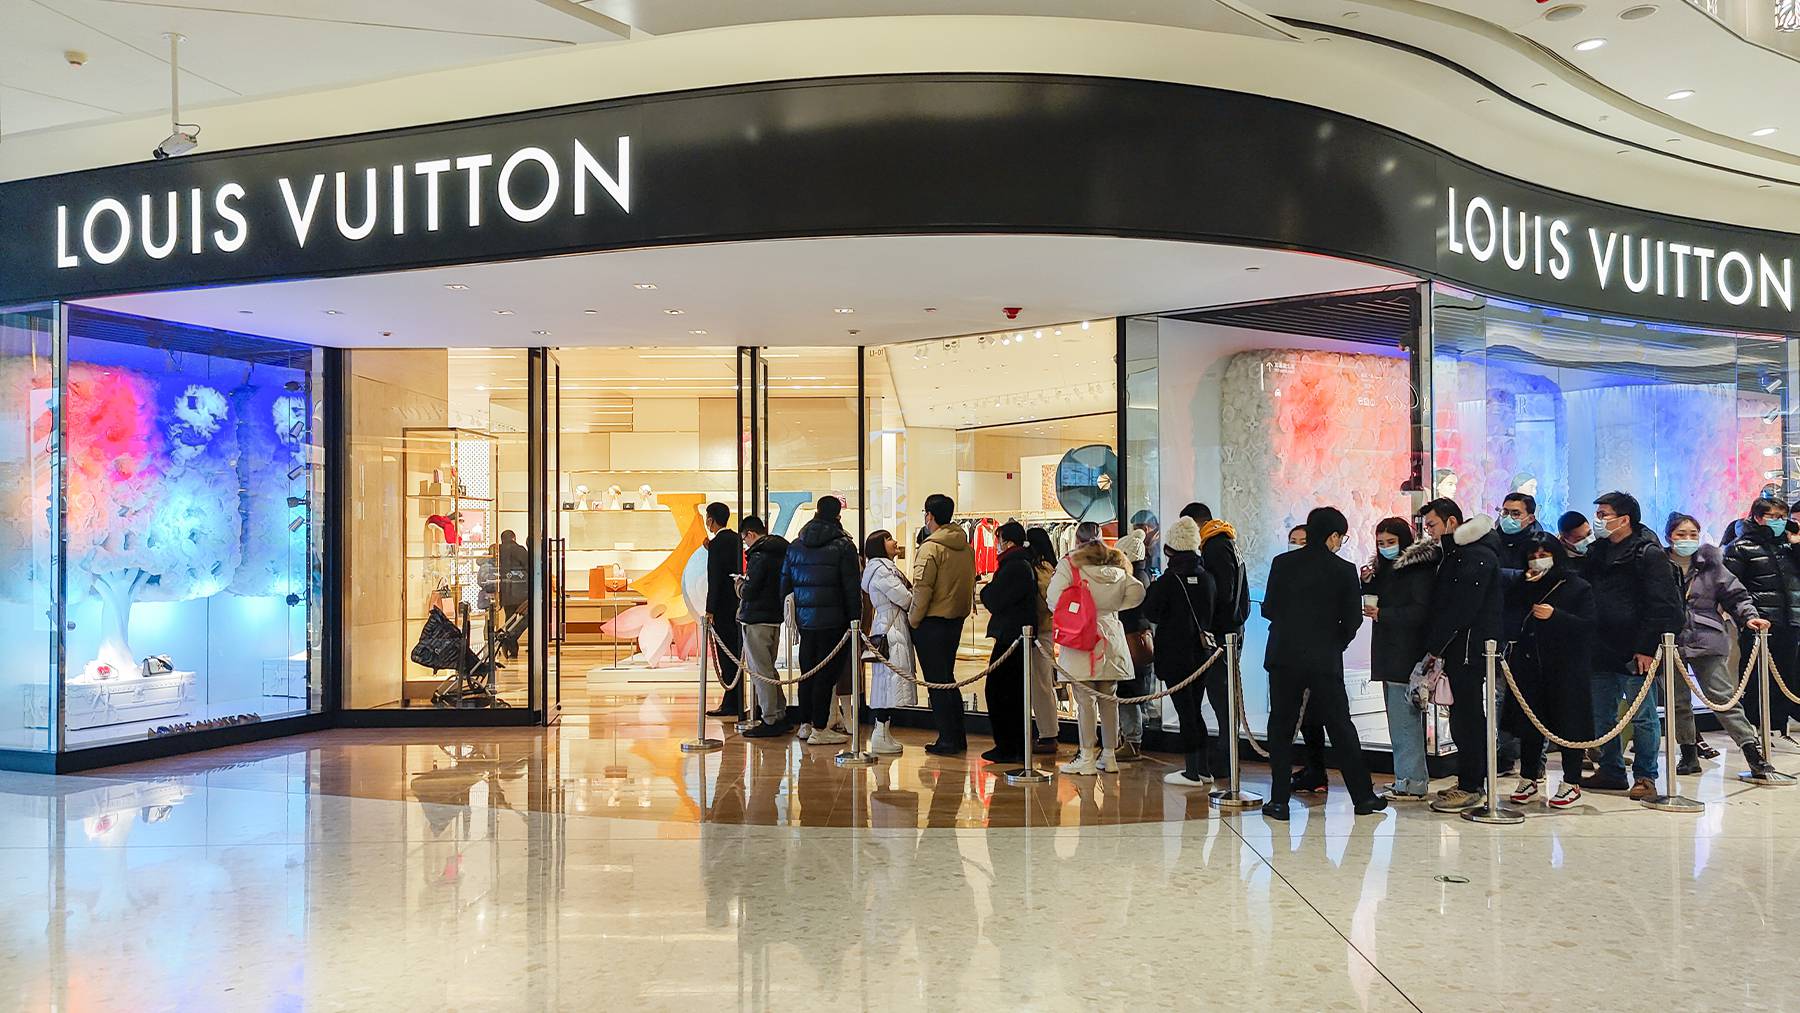 Customers wait in line to enter a Louis Vuitton shop in Shanghai. Getty Images.